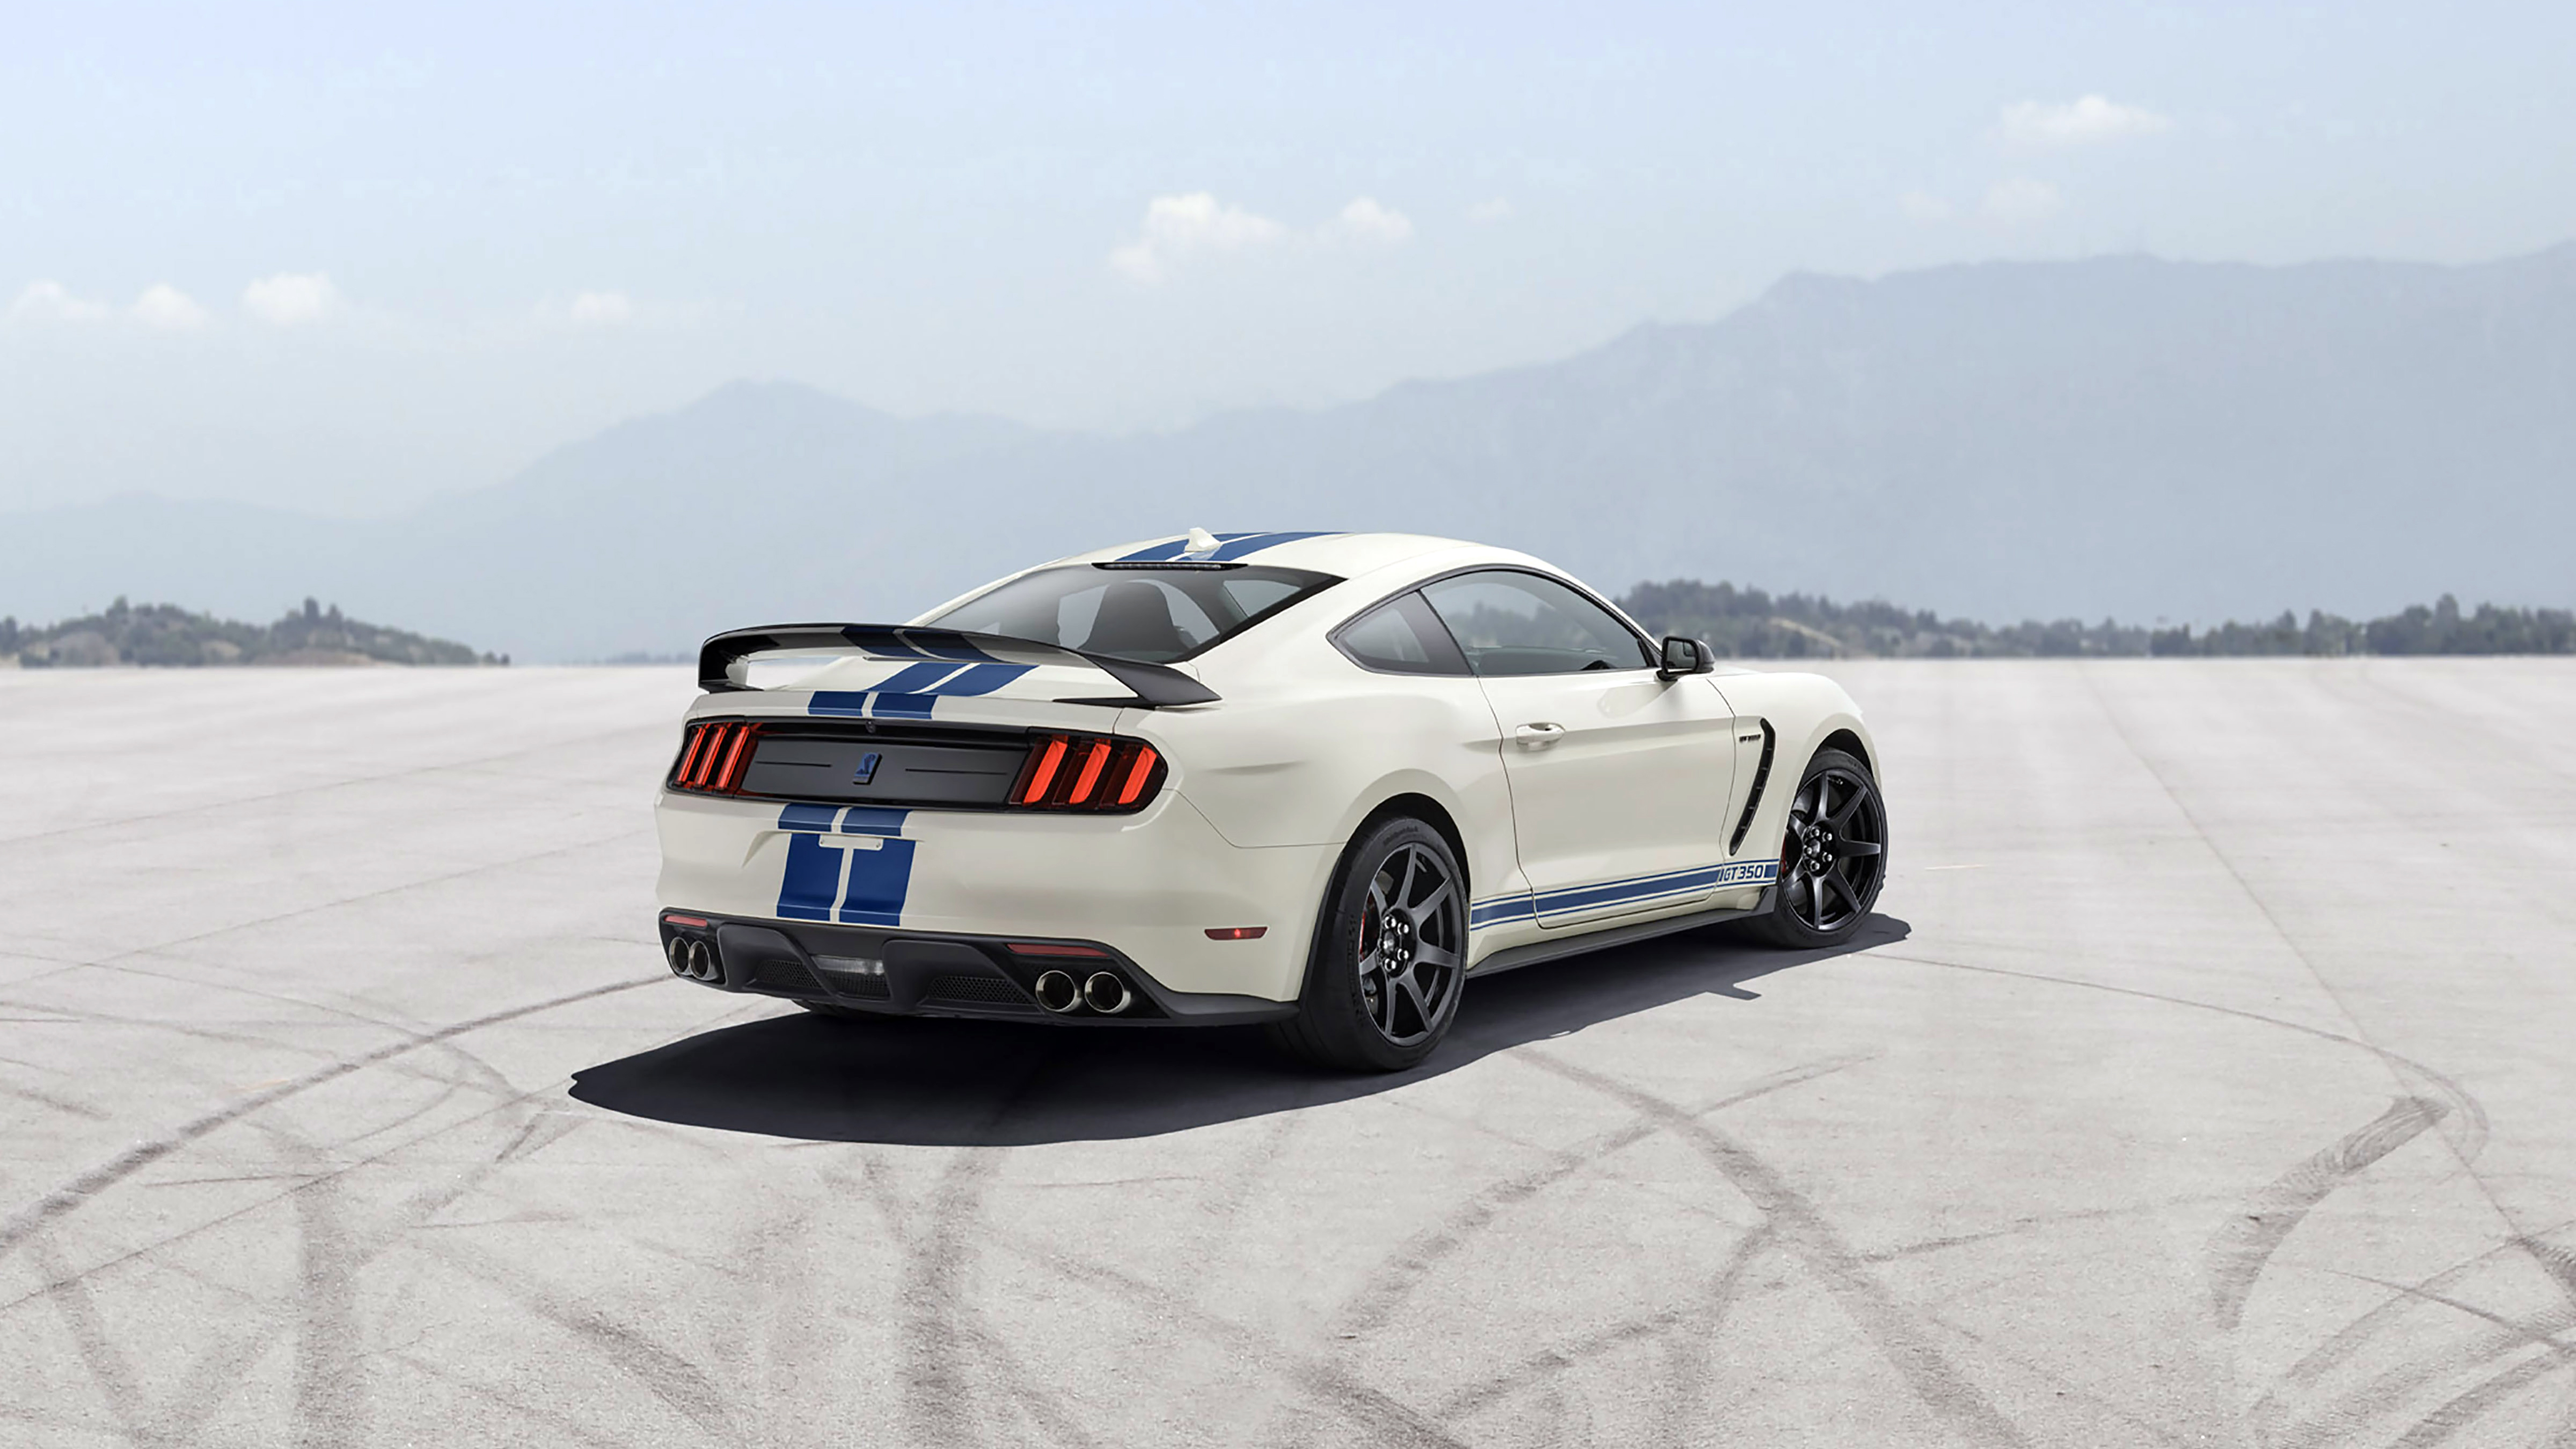 2020 Ford Mustang Shelby GT350R